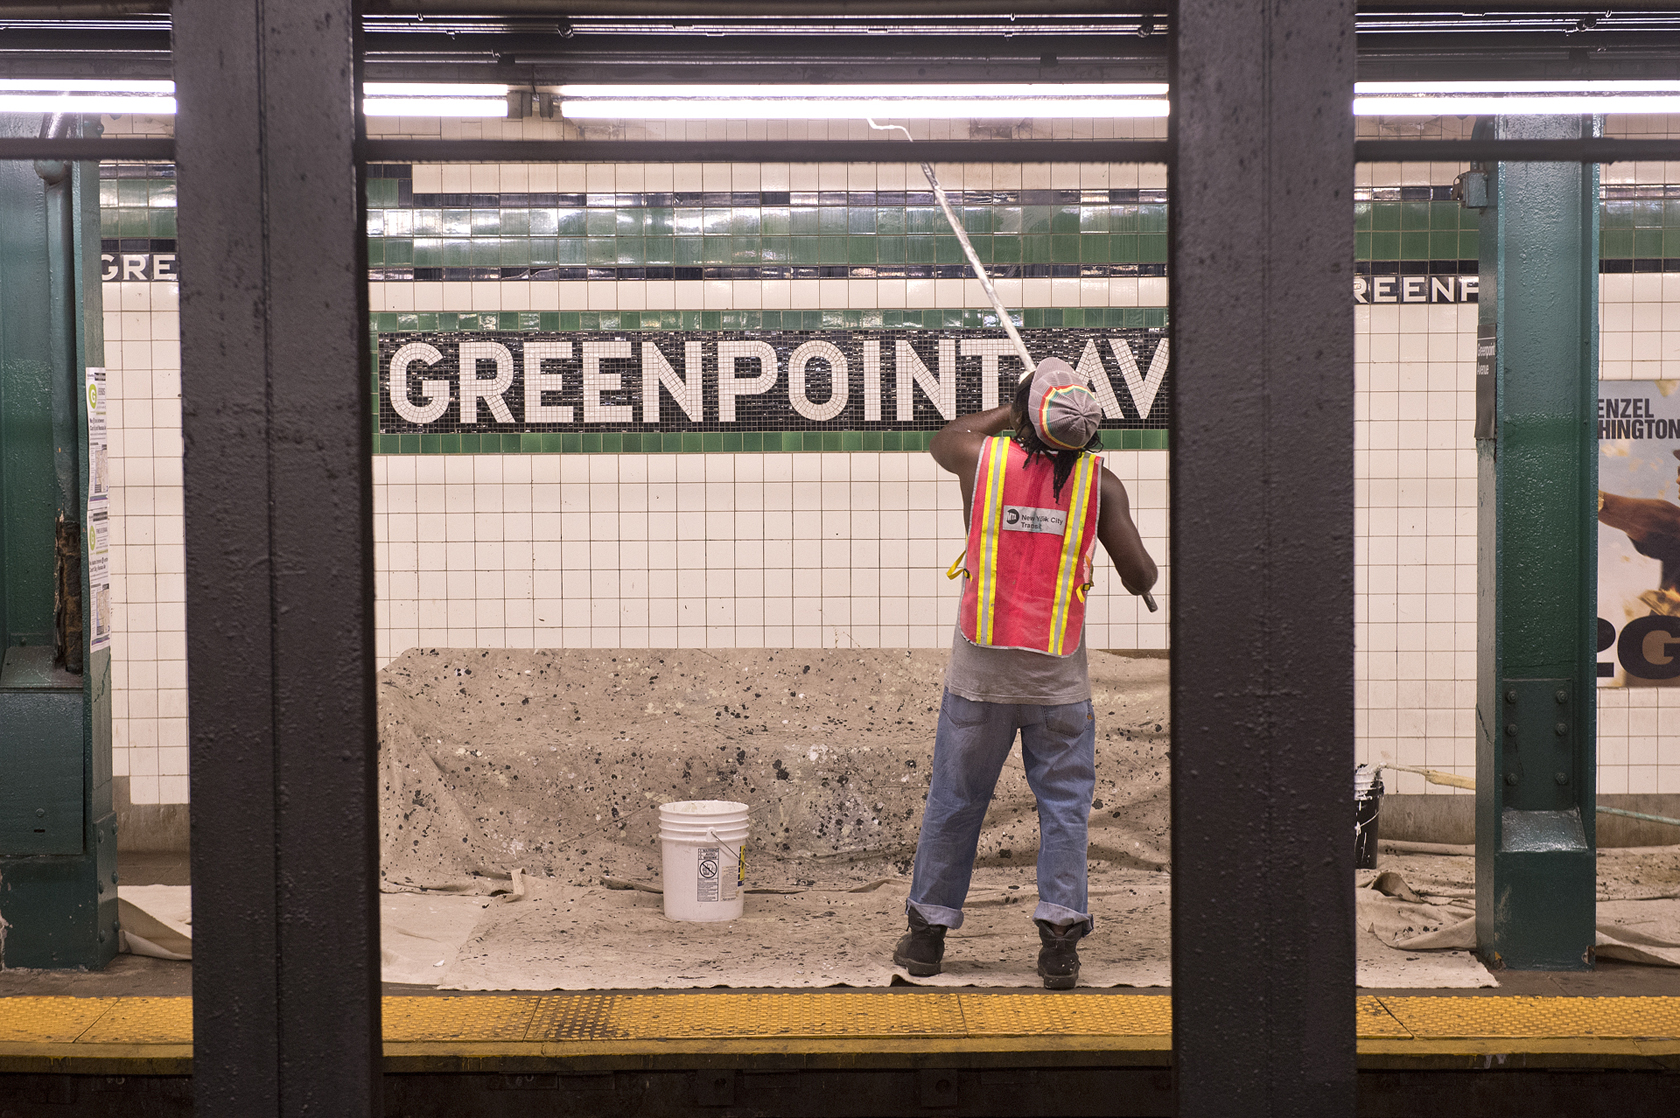 Greenpoint Avenue G station will get three elevators and full ADA-compliant features